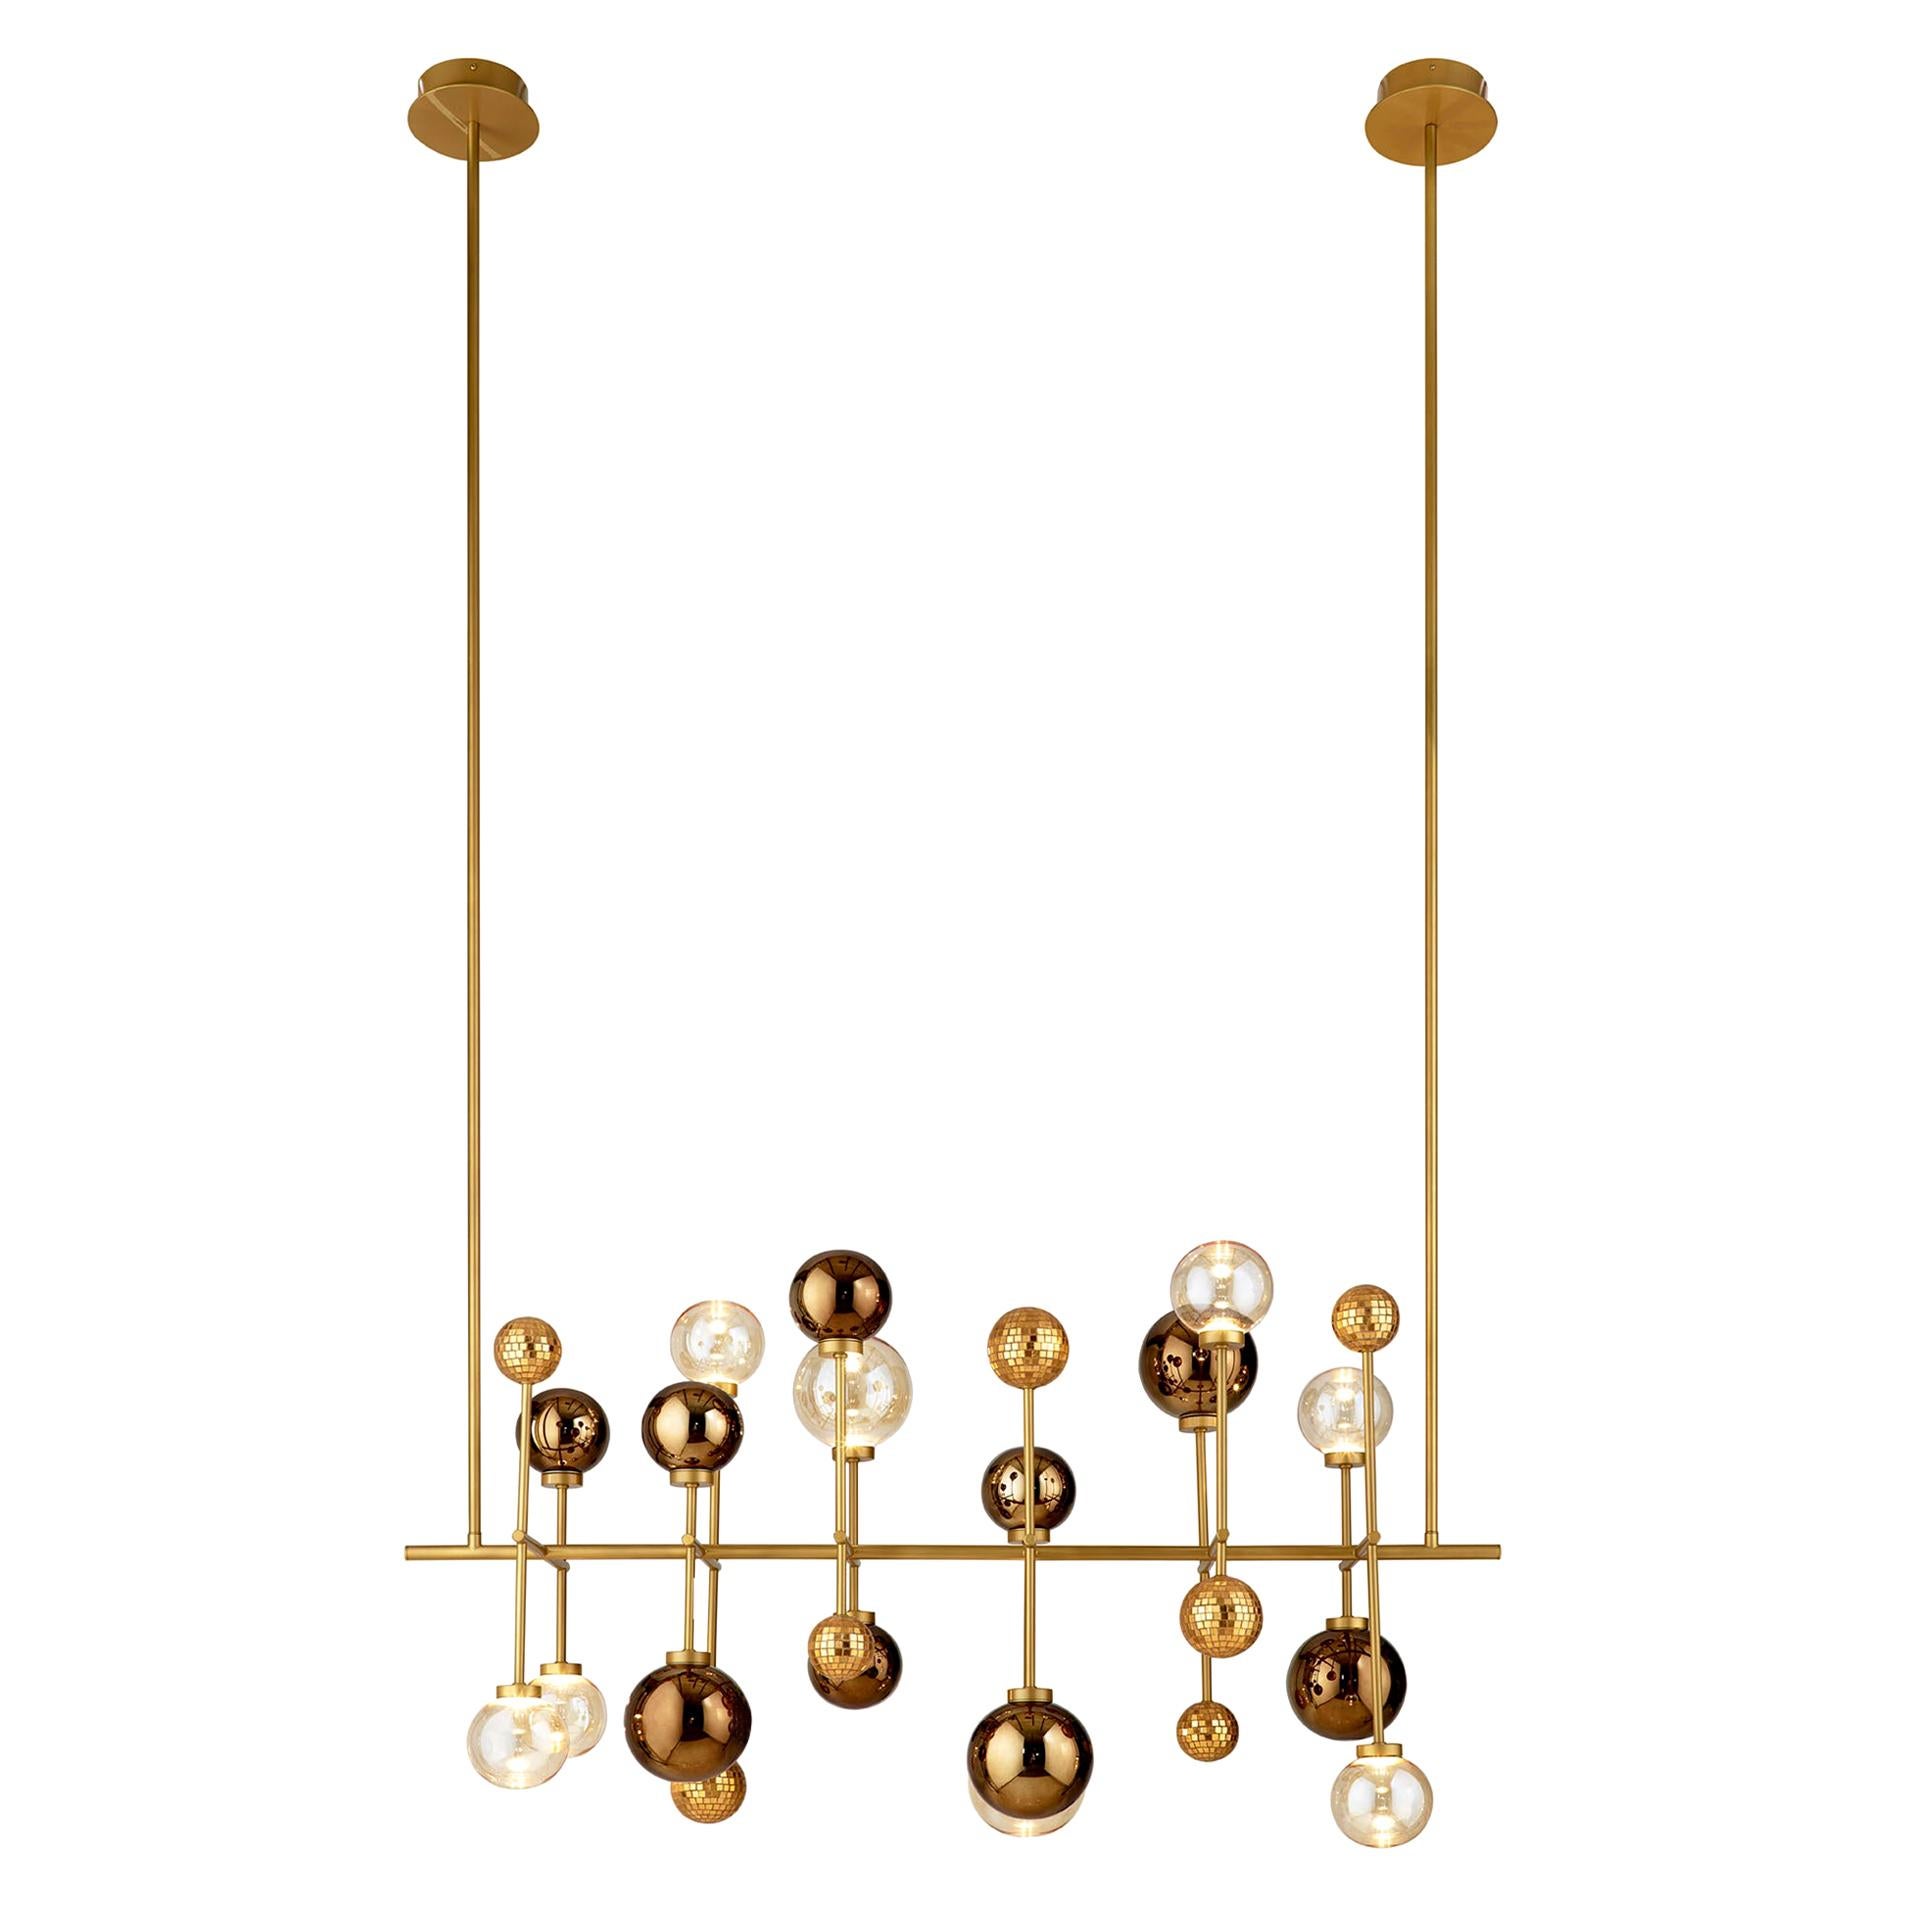 Ceiling Lamp Brass Frame Nickel or Brass Finish Glass Spheres Artistic Mosaic